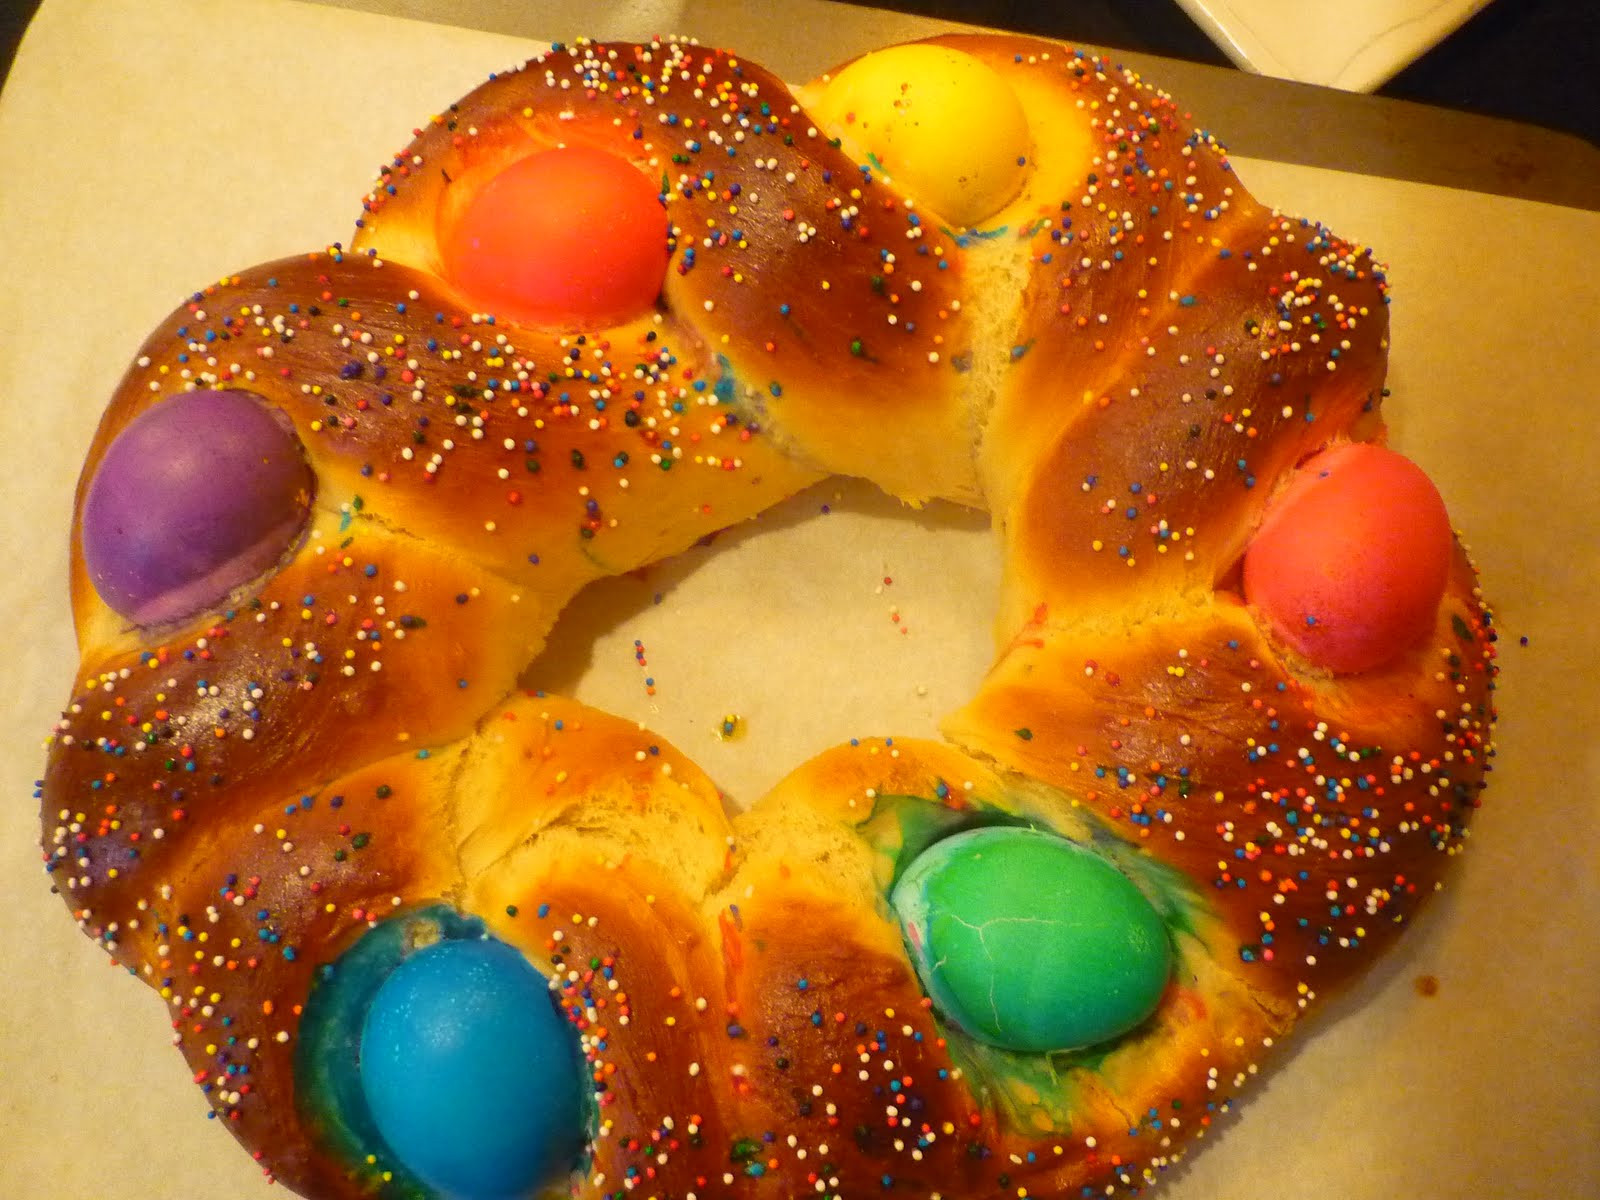 Italian Easter Bread With Hard Boiled Eggs
 Eat A Plant Buona Pasqua with Italian Easter Bread